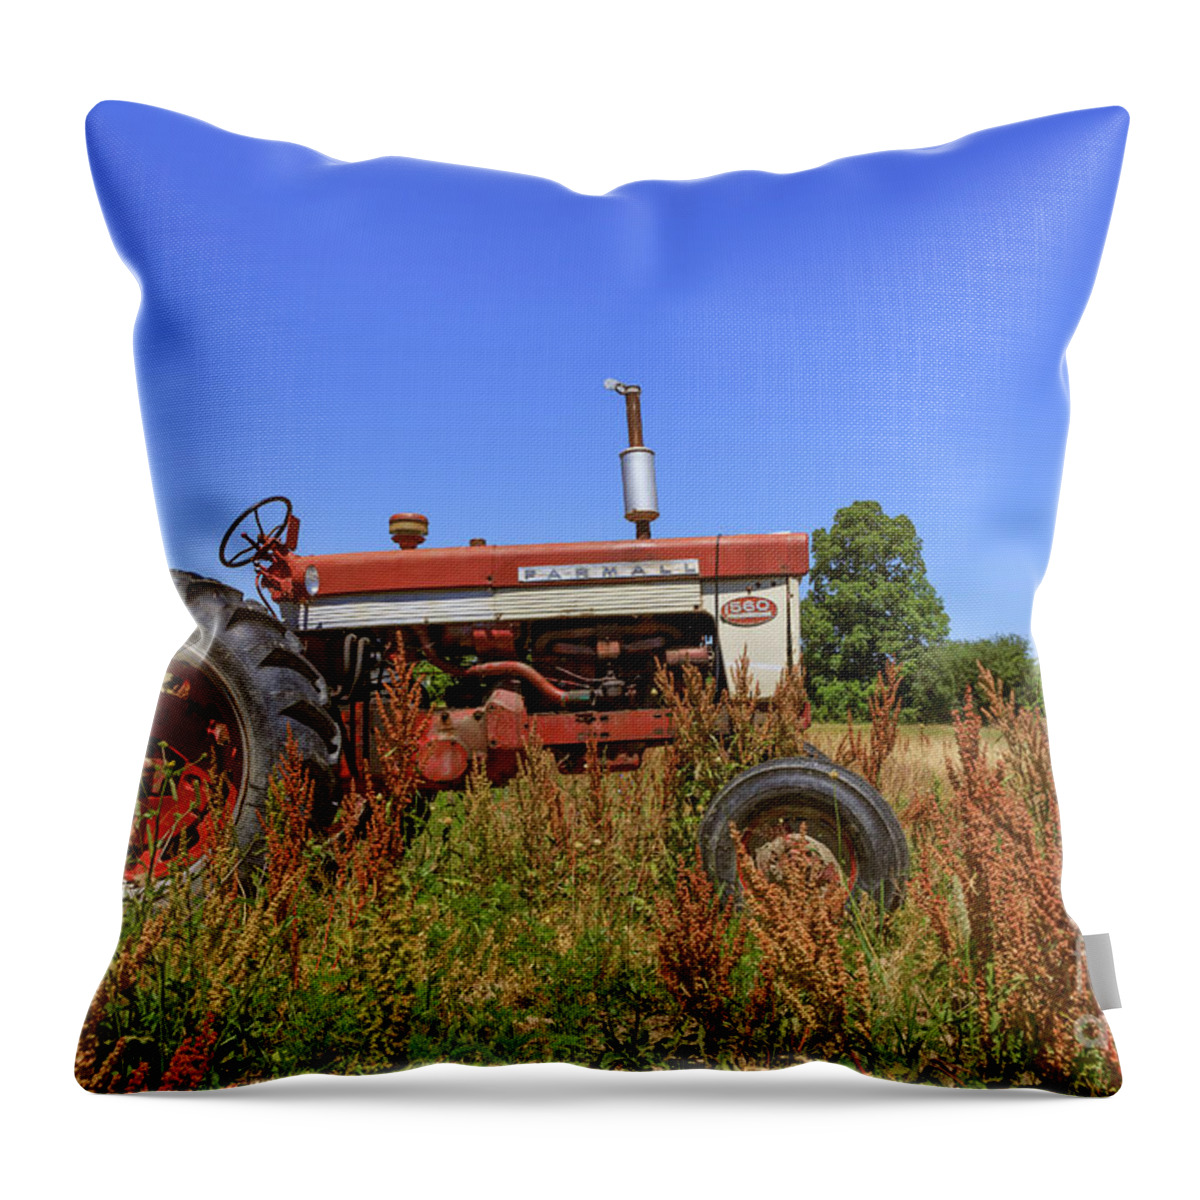 Tractor Throw Pillow featuring the photograph Vintage Tractor Finger Lakes by Edward Fielding